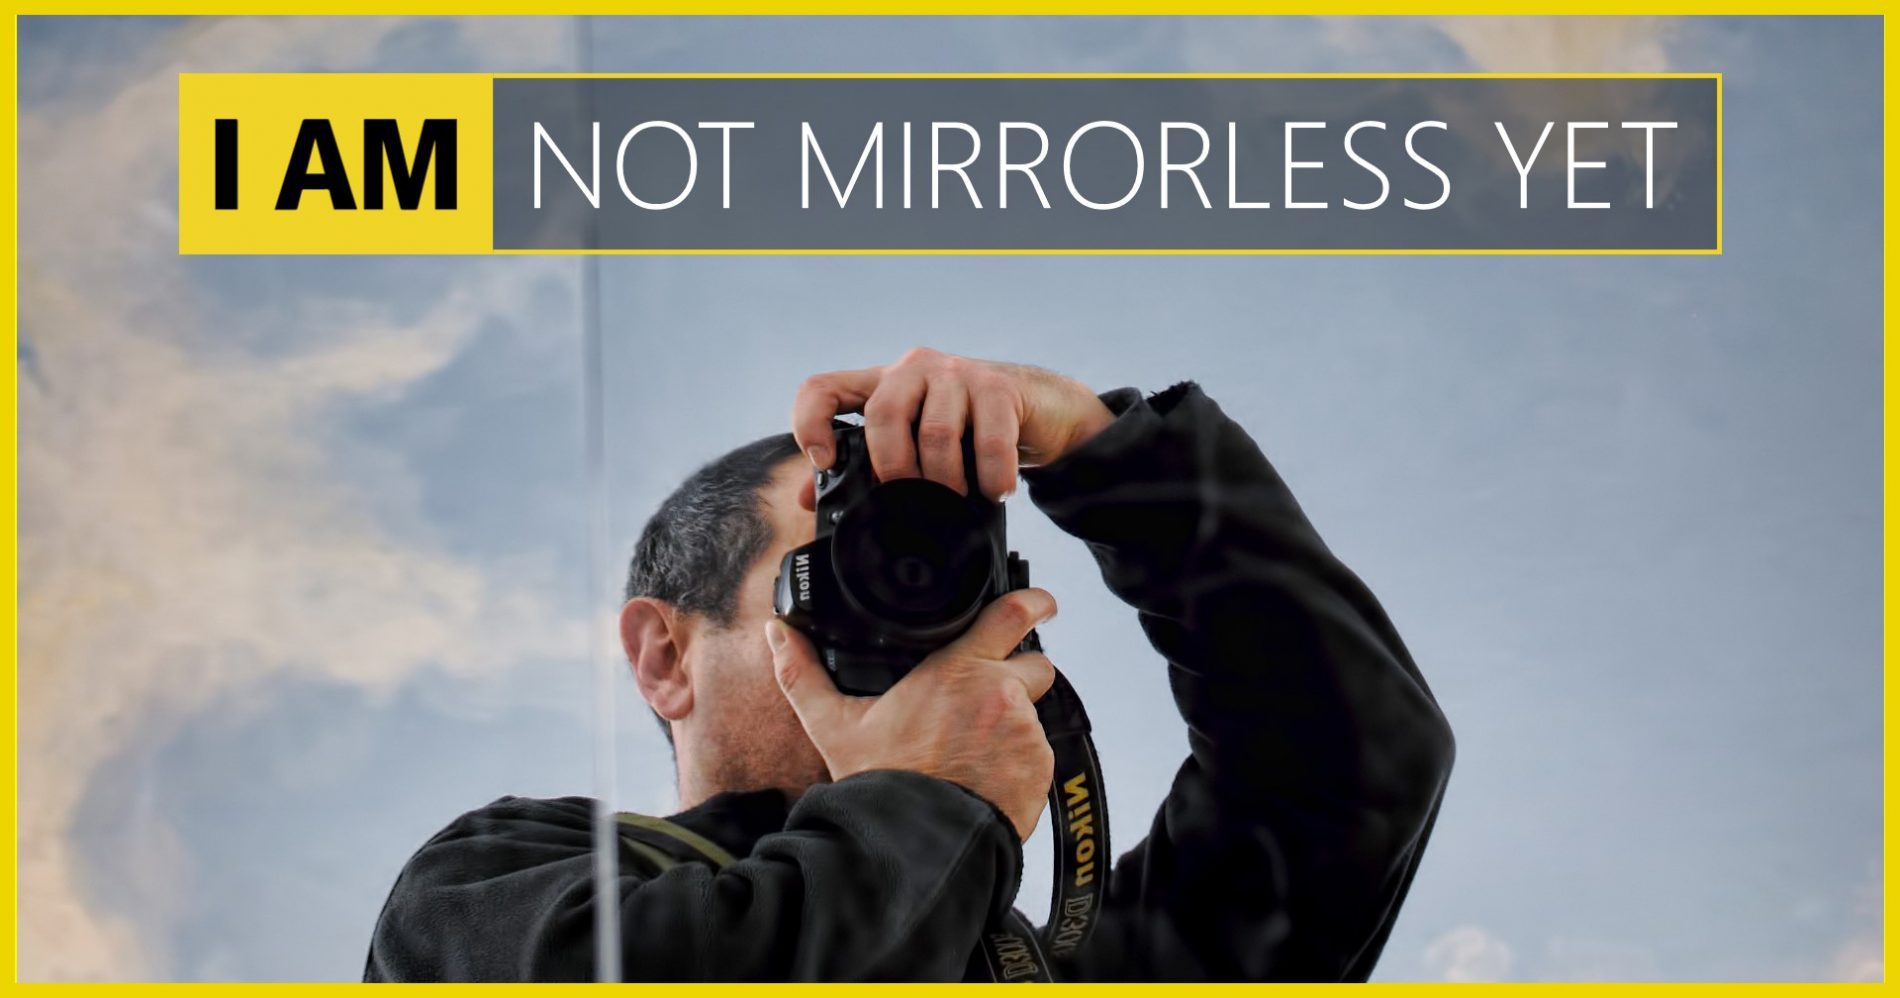 A DSLR or a MIRRORLESS Camera for the Holidays?